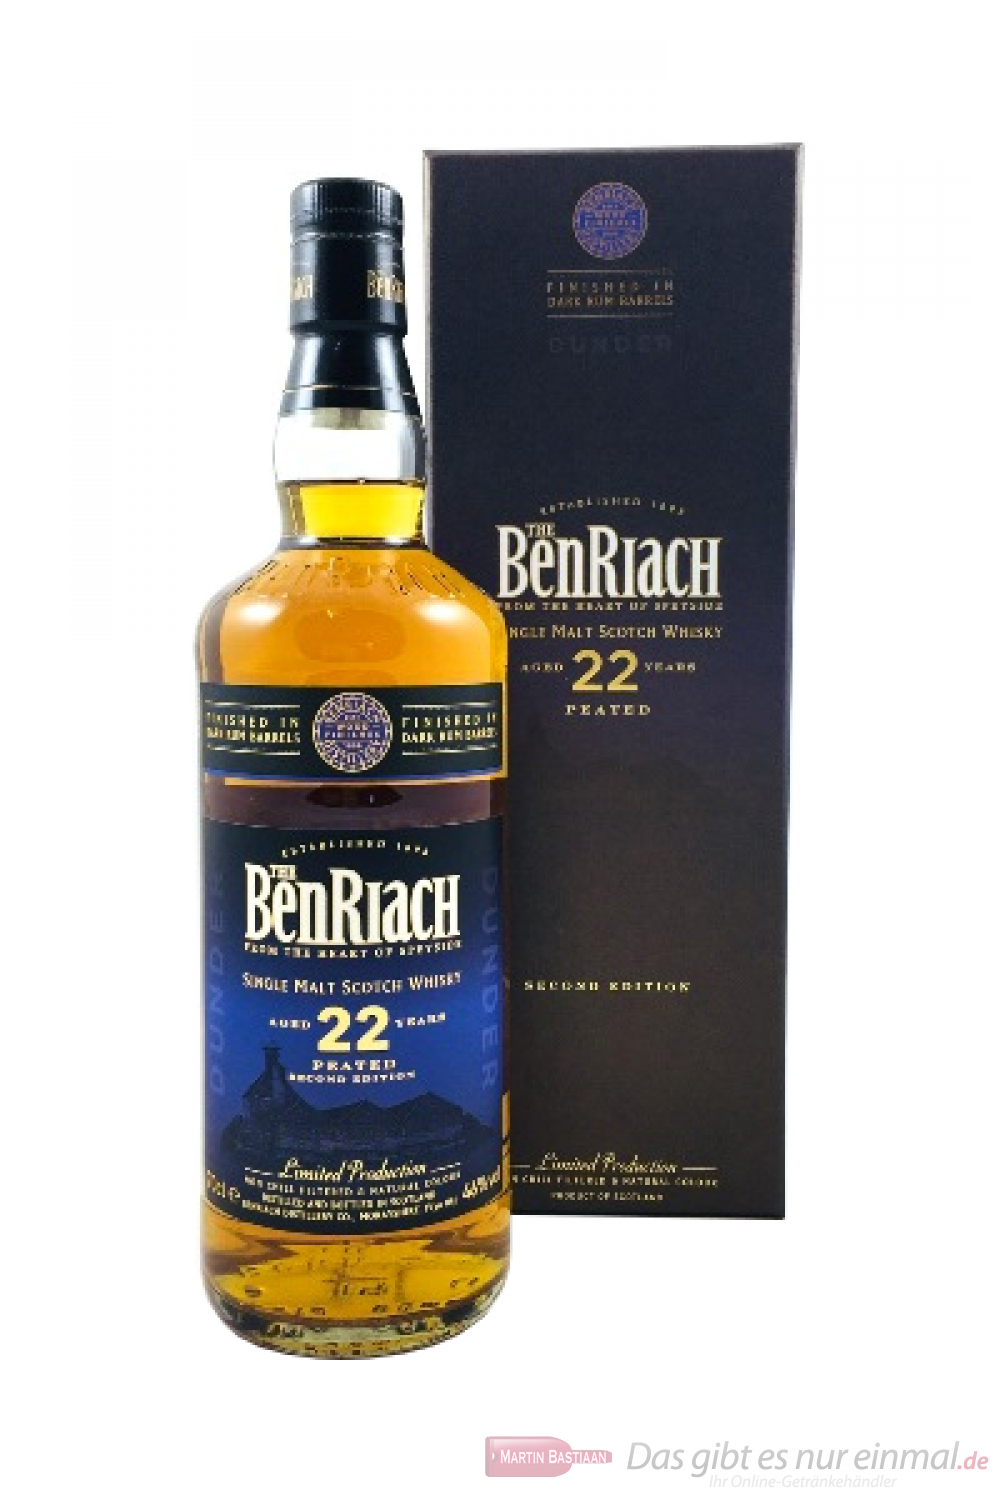 Benriach 22 Years Peated Second Edition Dunder